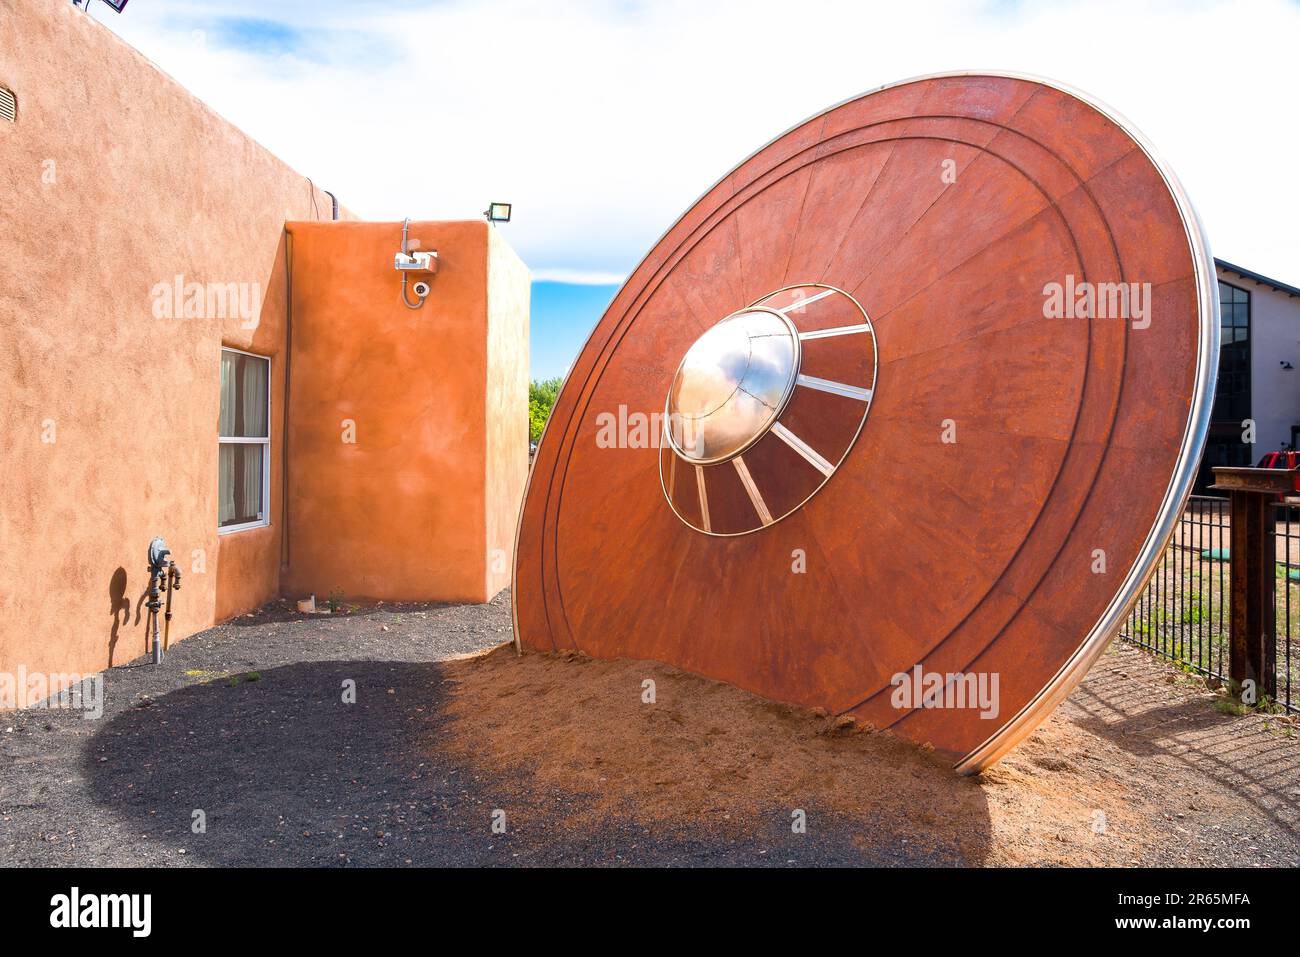 Metal sculpture of a 15' tall flying saucer that has crashed and is stuck in the earth at an odd angle, for sale by artist RT Davis, Santa Fe, NM. Stock Photo